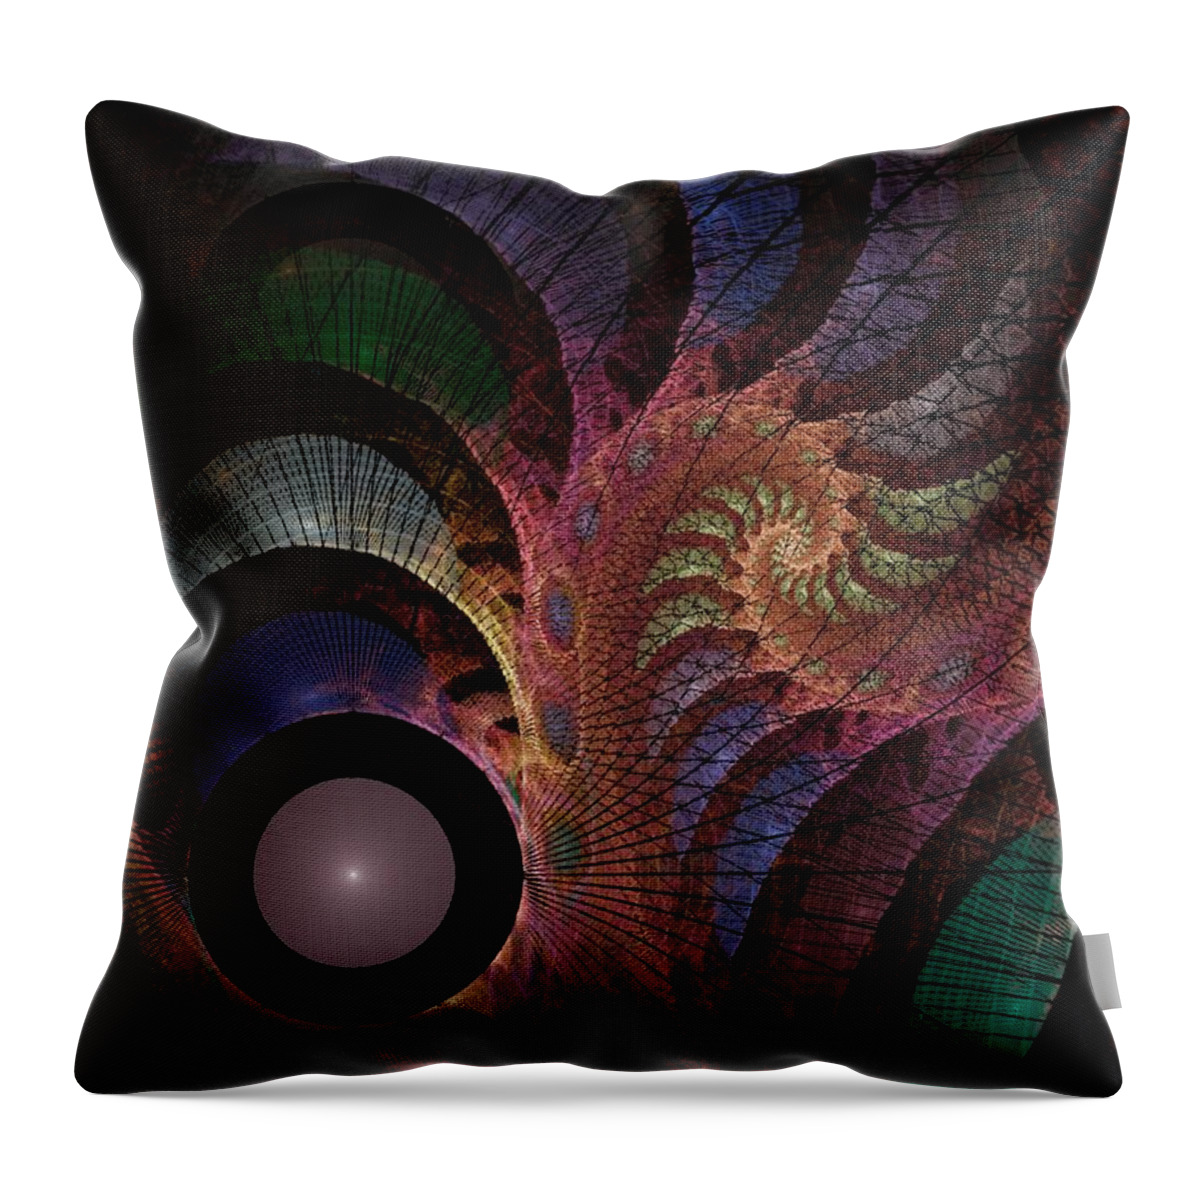 Abstract Throw Pillow featuring the digital art Freefall - Fractal Art by Nirvana Blues